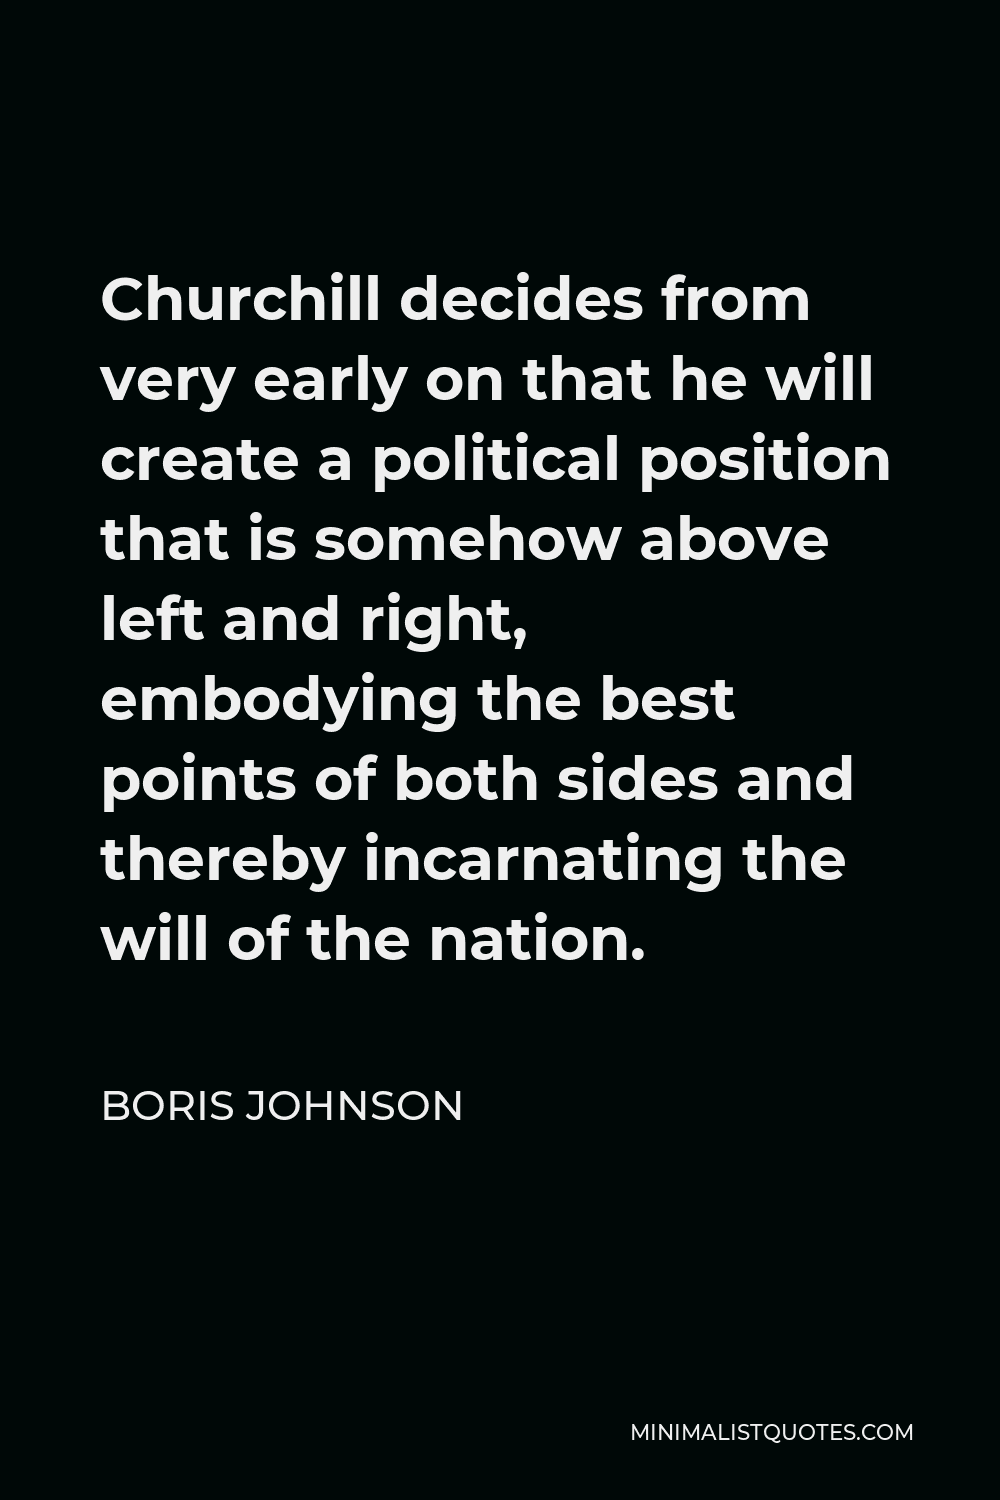 Boris Johnson Quote - Churchill decides from very early on that he will create a political position that is somehow above left and right, embodying the best points of both sides and thereby incarnating the will of the nation.